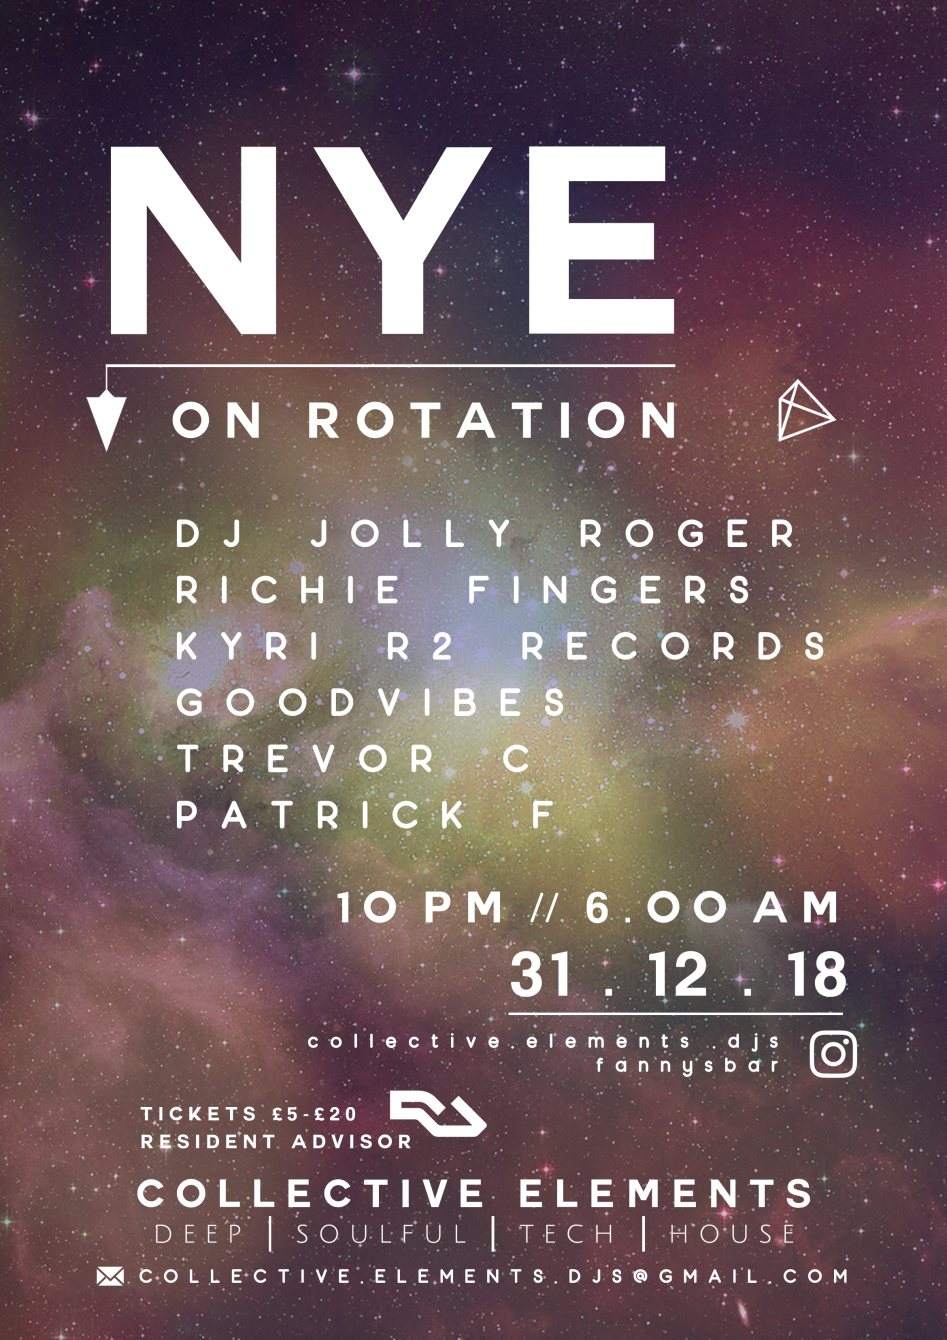 Collective Elements NYE - フライヤー裏